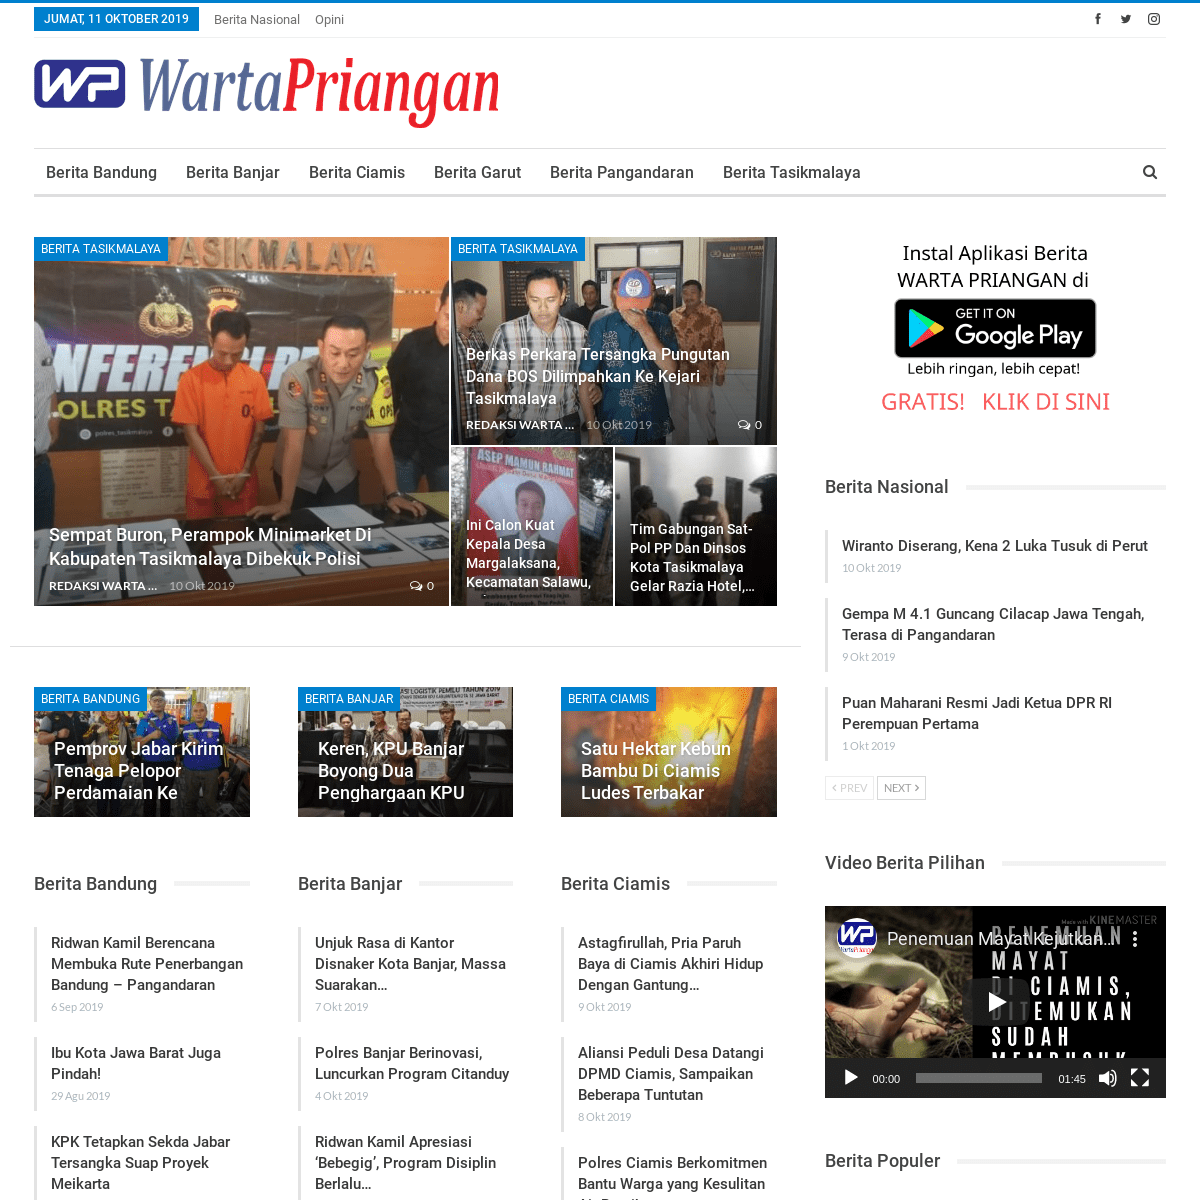 A complete backup of wartapriangan.com